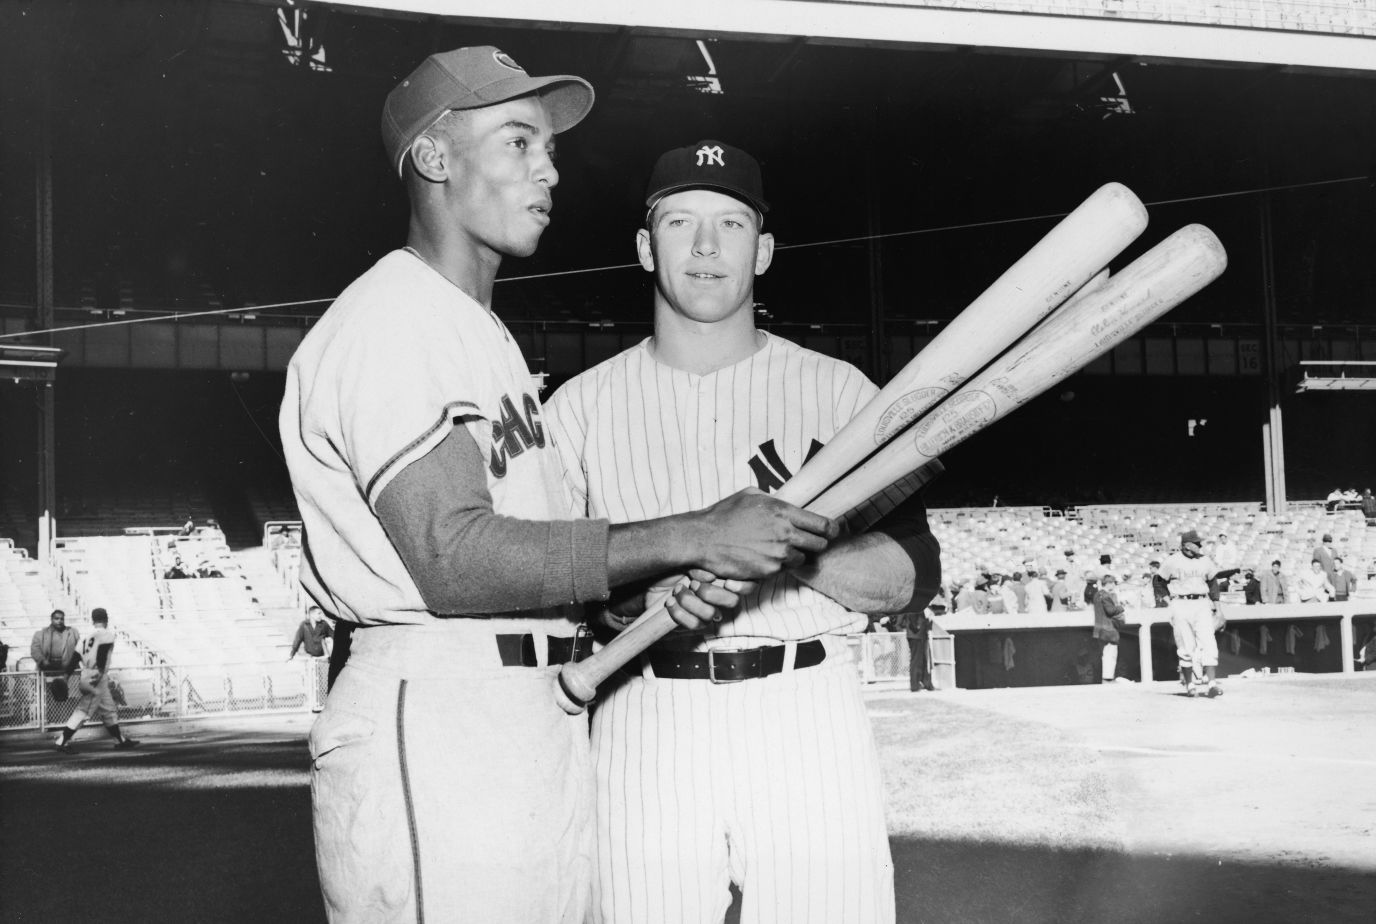 Mickey Mantle, Ernie Banks among top selling vintage jerseys by state 